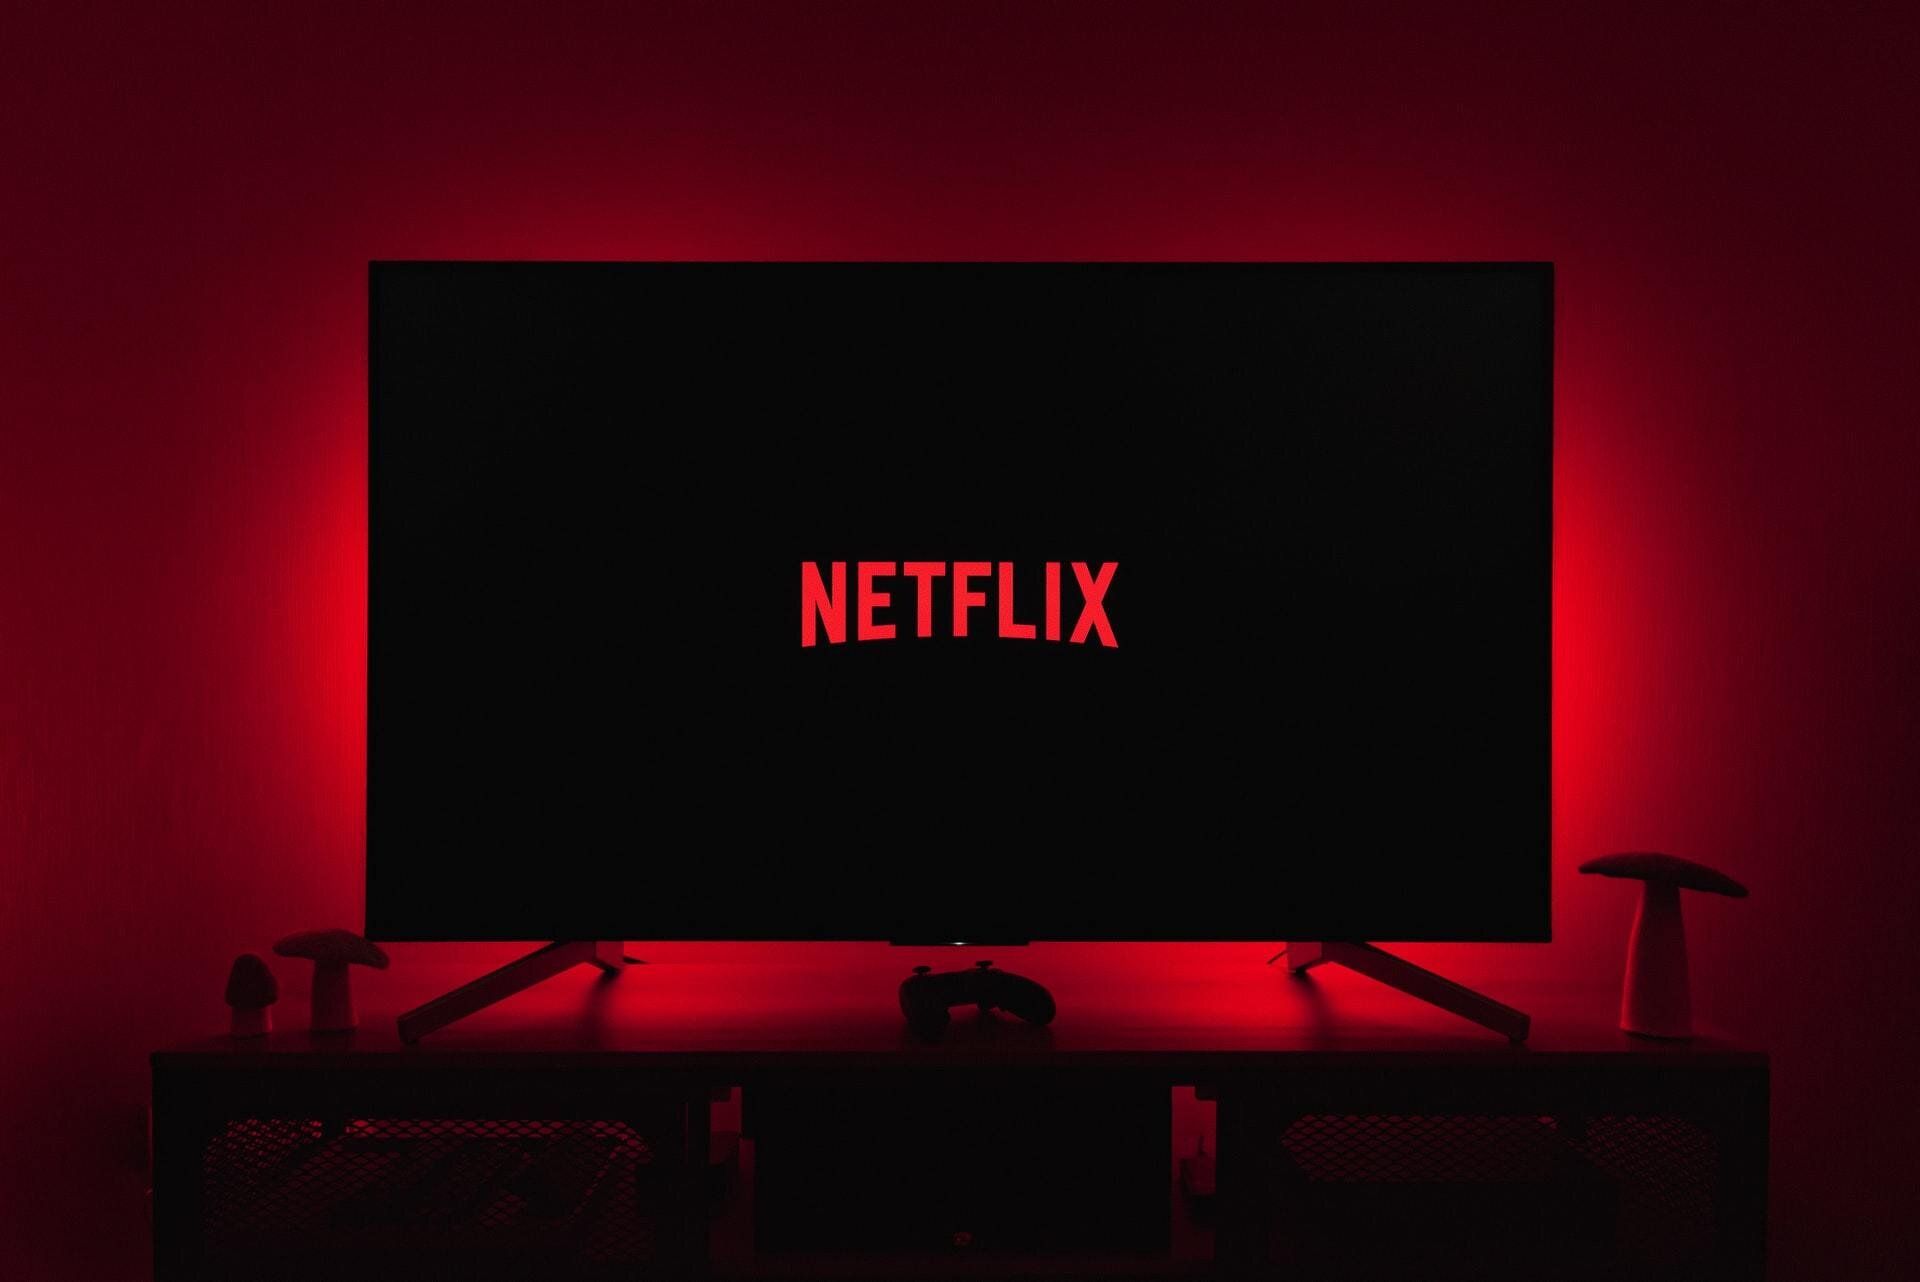 If you don't log in to your Netflix account for a month, you'll receive a temporary code